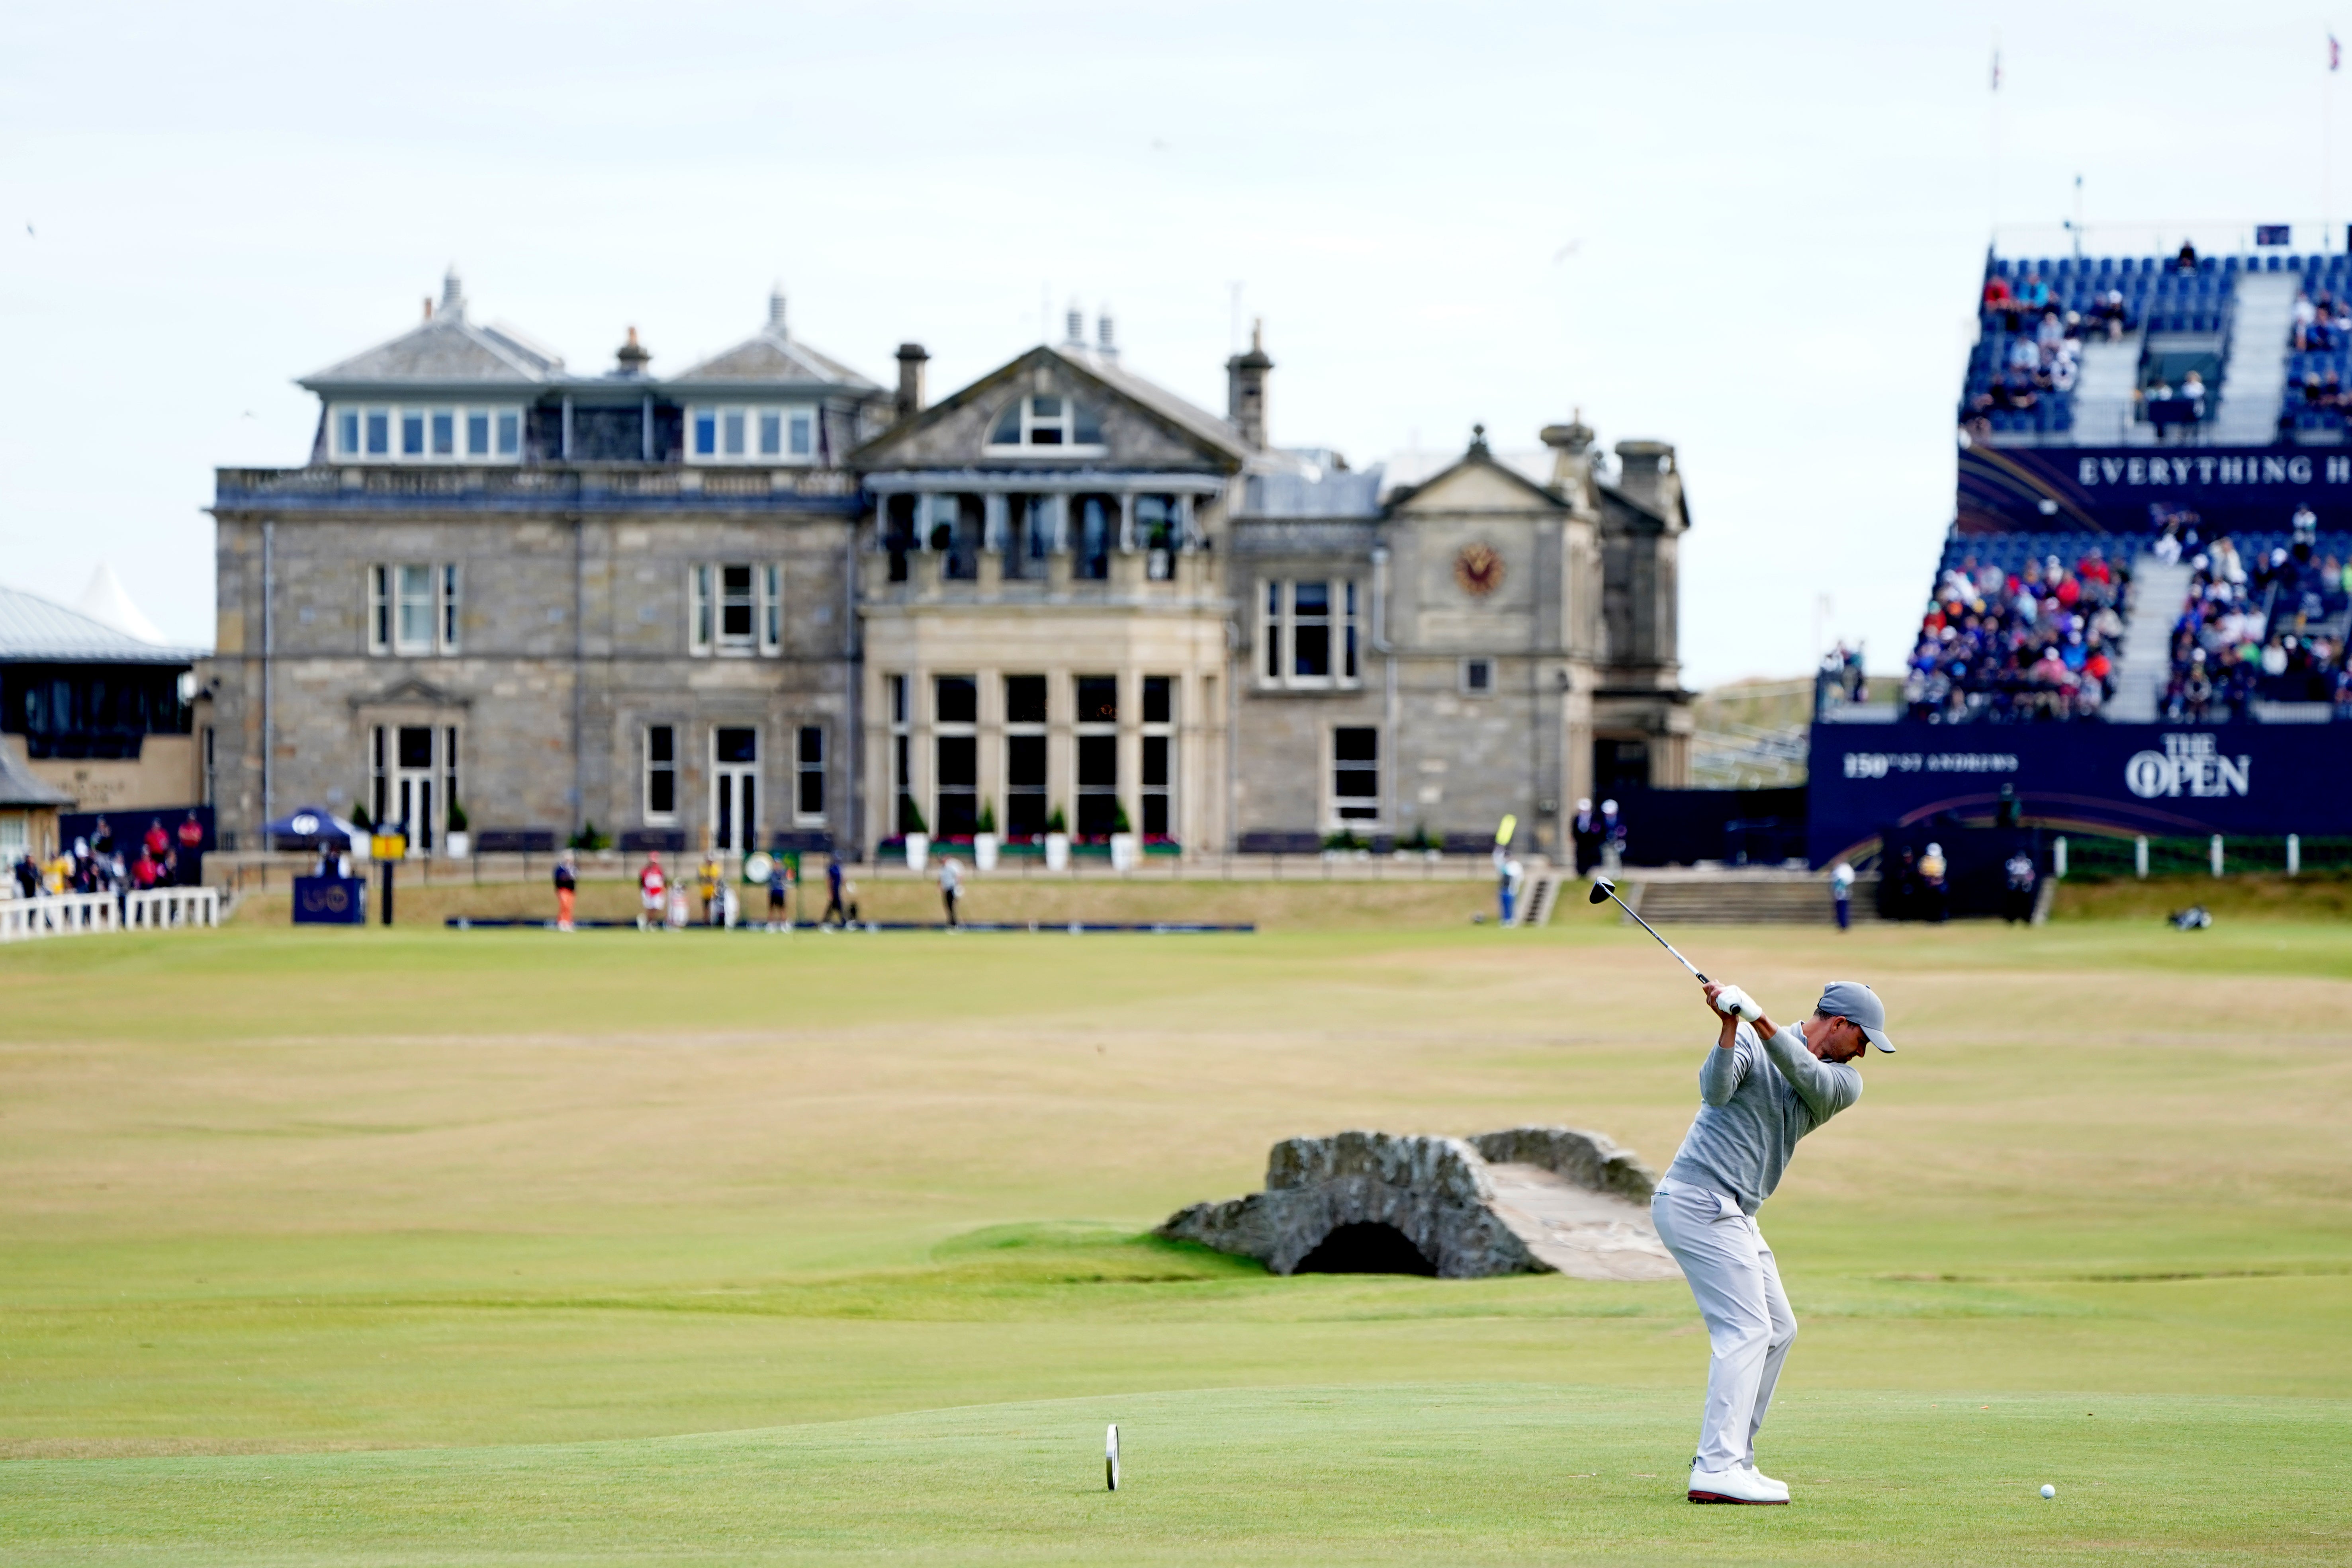 Australia’s Adam Scott tees off the 18th during day two of The Open at the Old Course, St Andrews (Jane Barlow/PA)